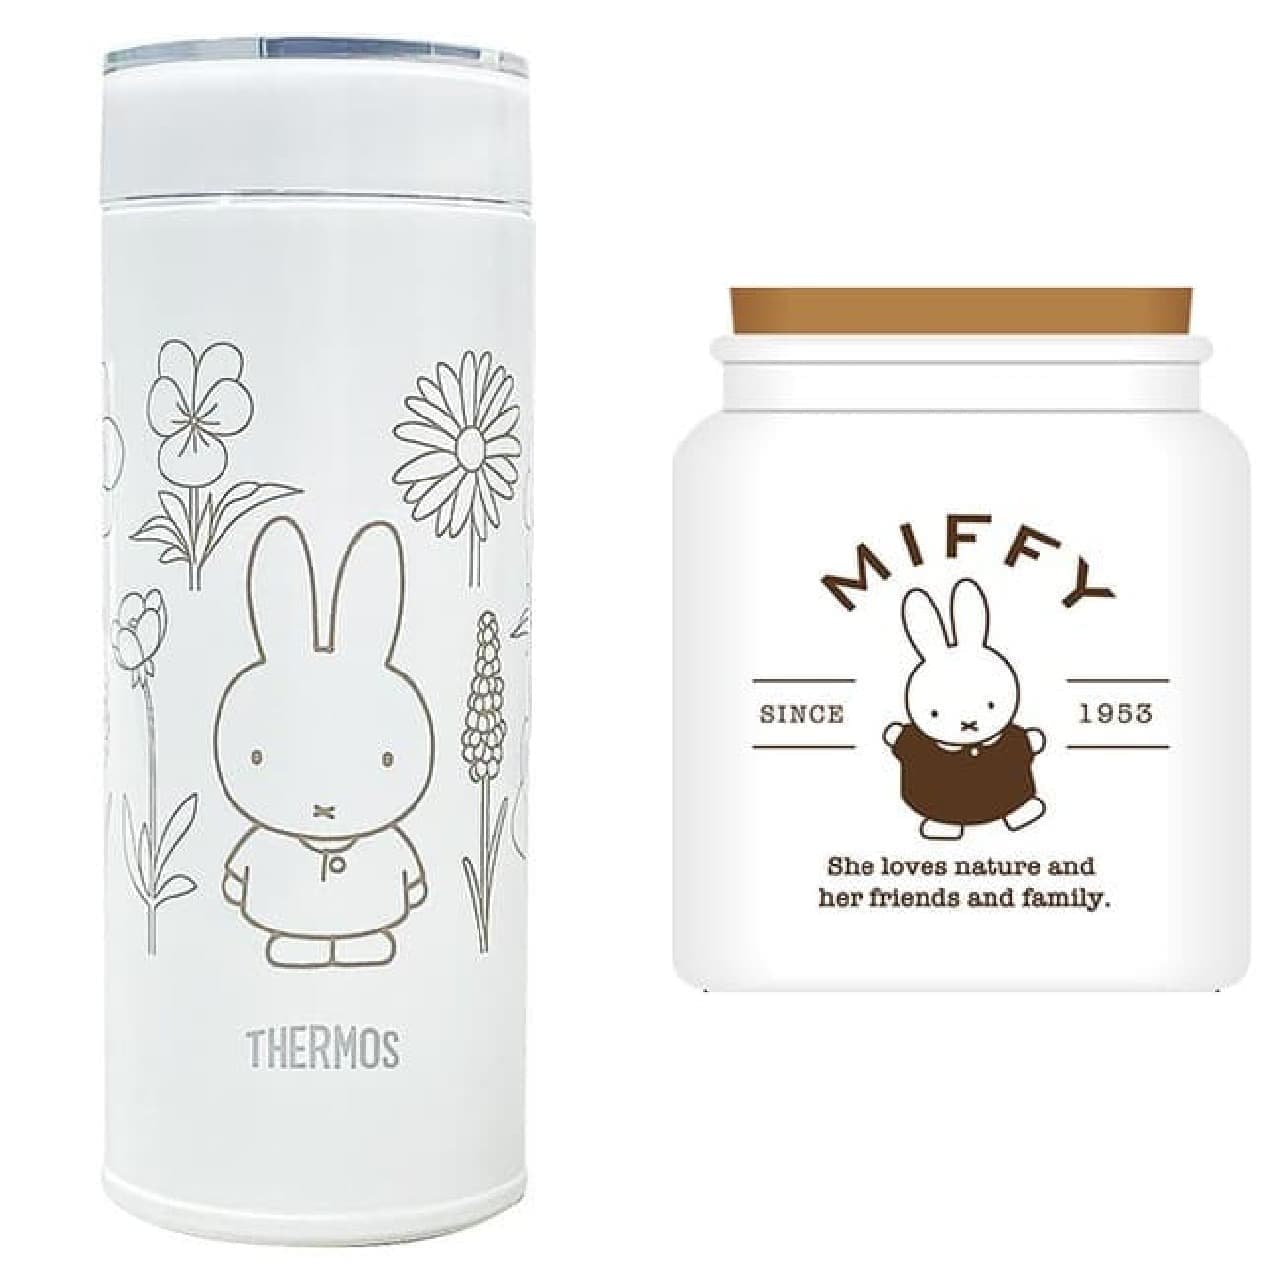 2022 new version "Miffy zakka Festa" at Seibu Ikebukuro main store --Event limited items and photo spots are now available! Purchase gifts